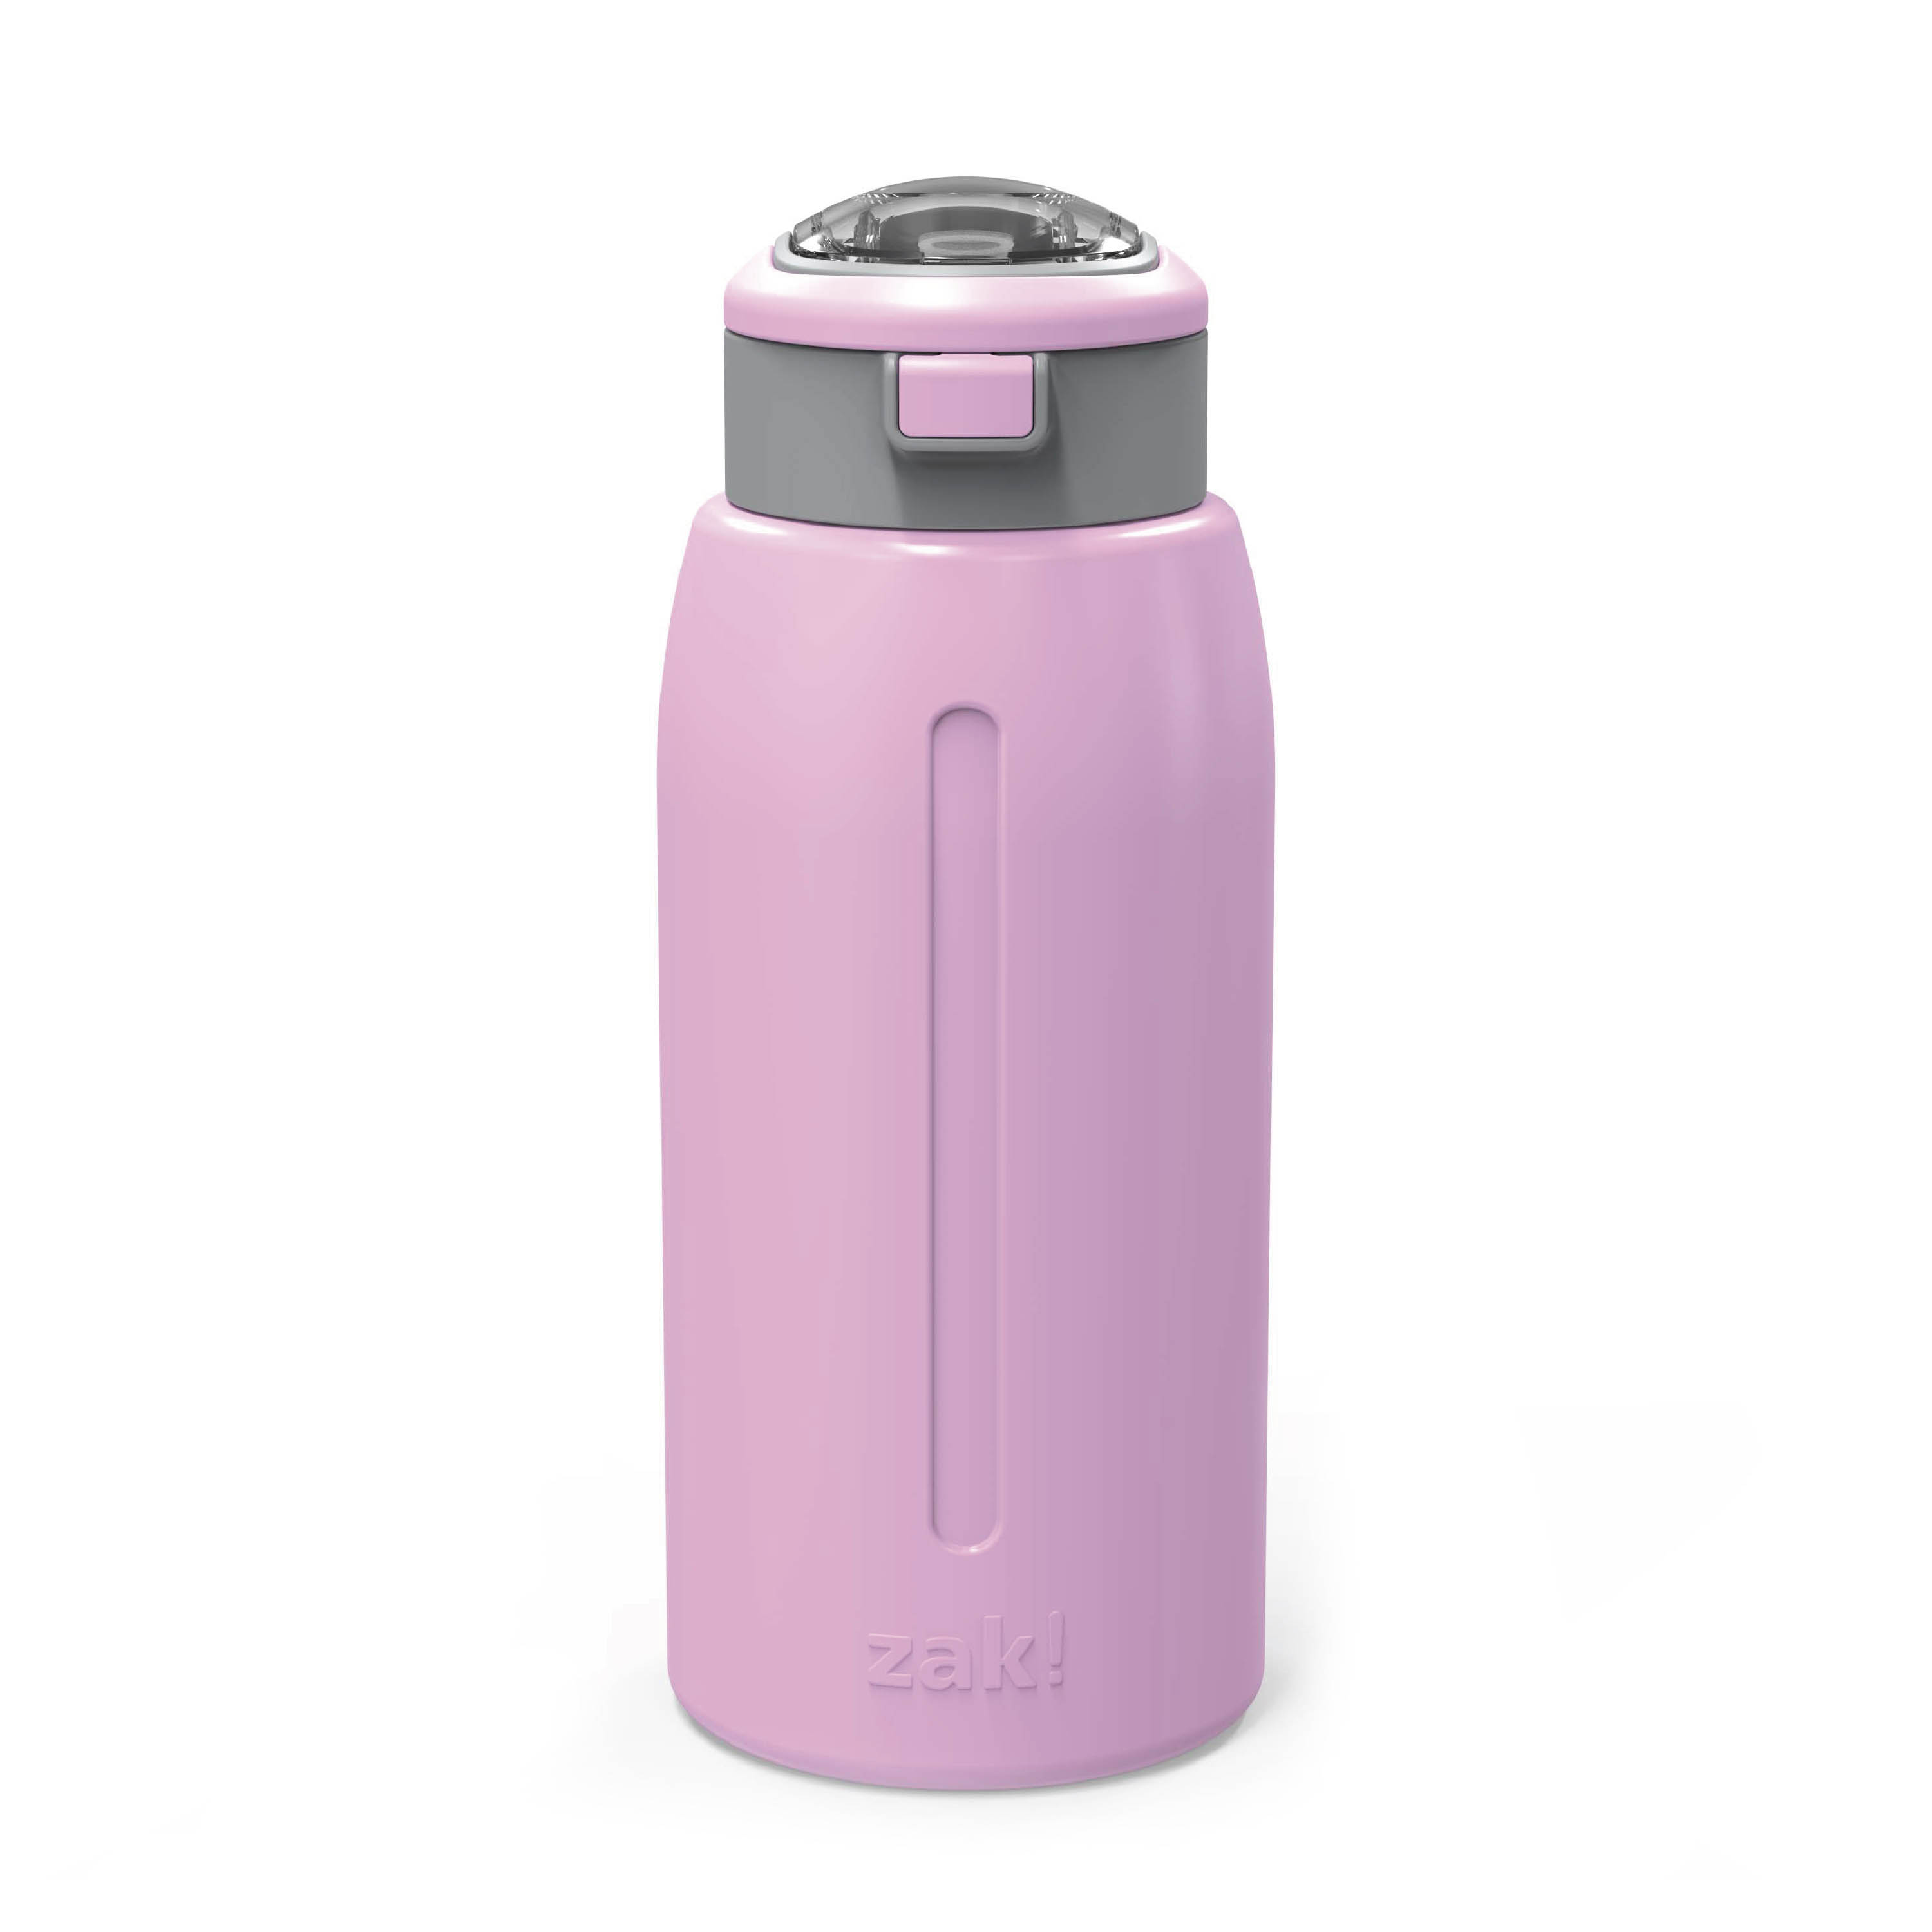 Genesis 32 ounce Stainless Steel Water Bottles, Lilac slideshow image 1